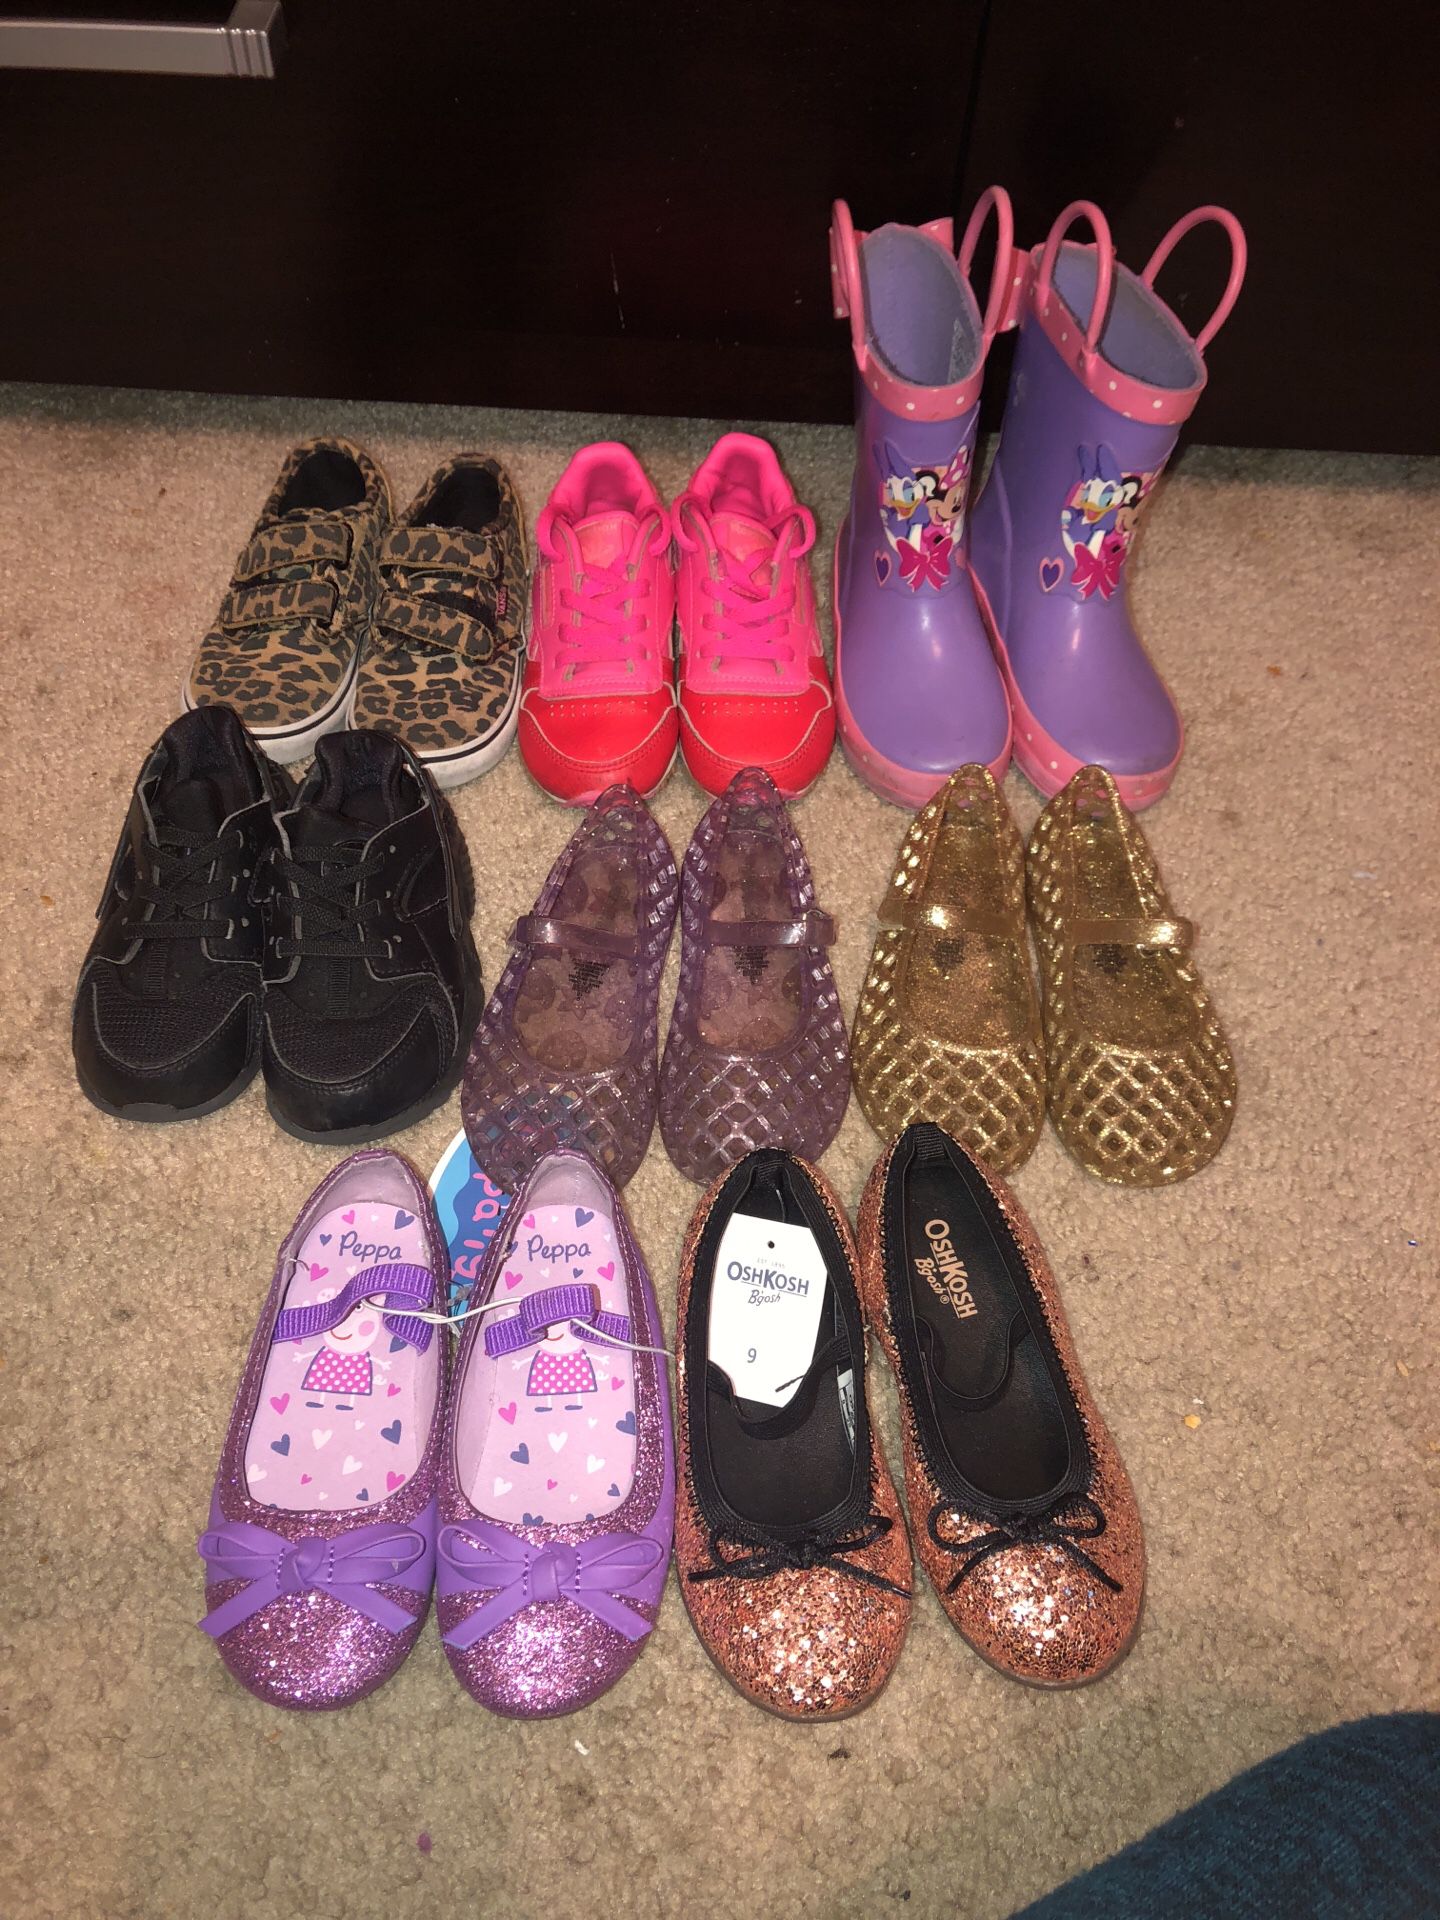 Toddler girl shoes 7c-9c $75 for all(jellies sold)